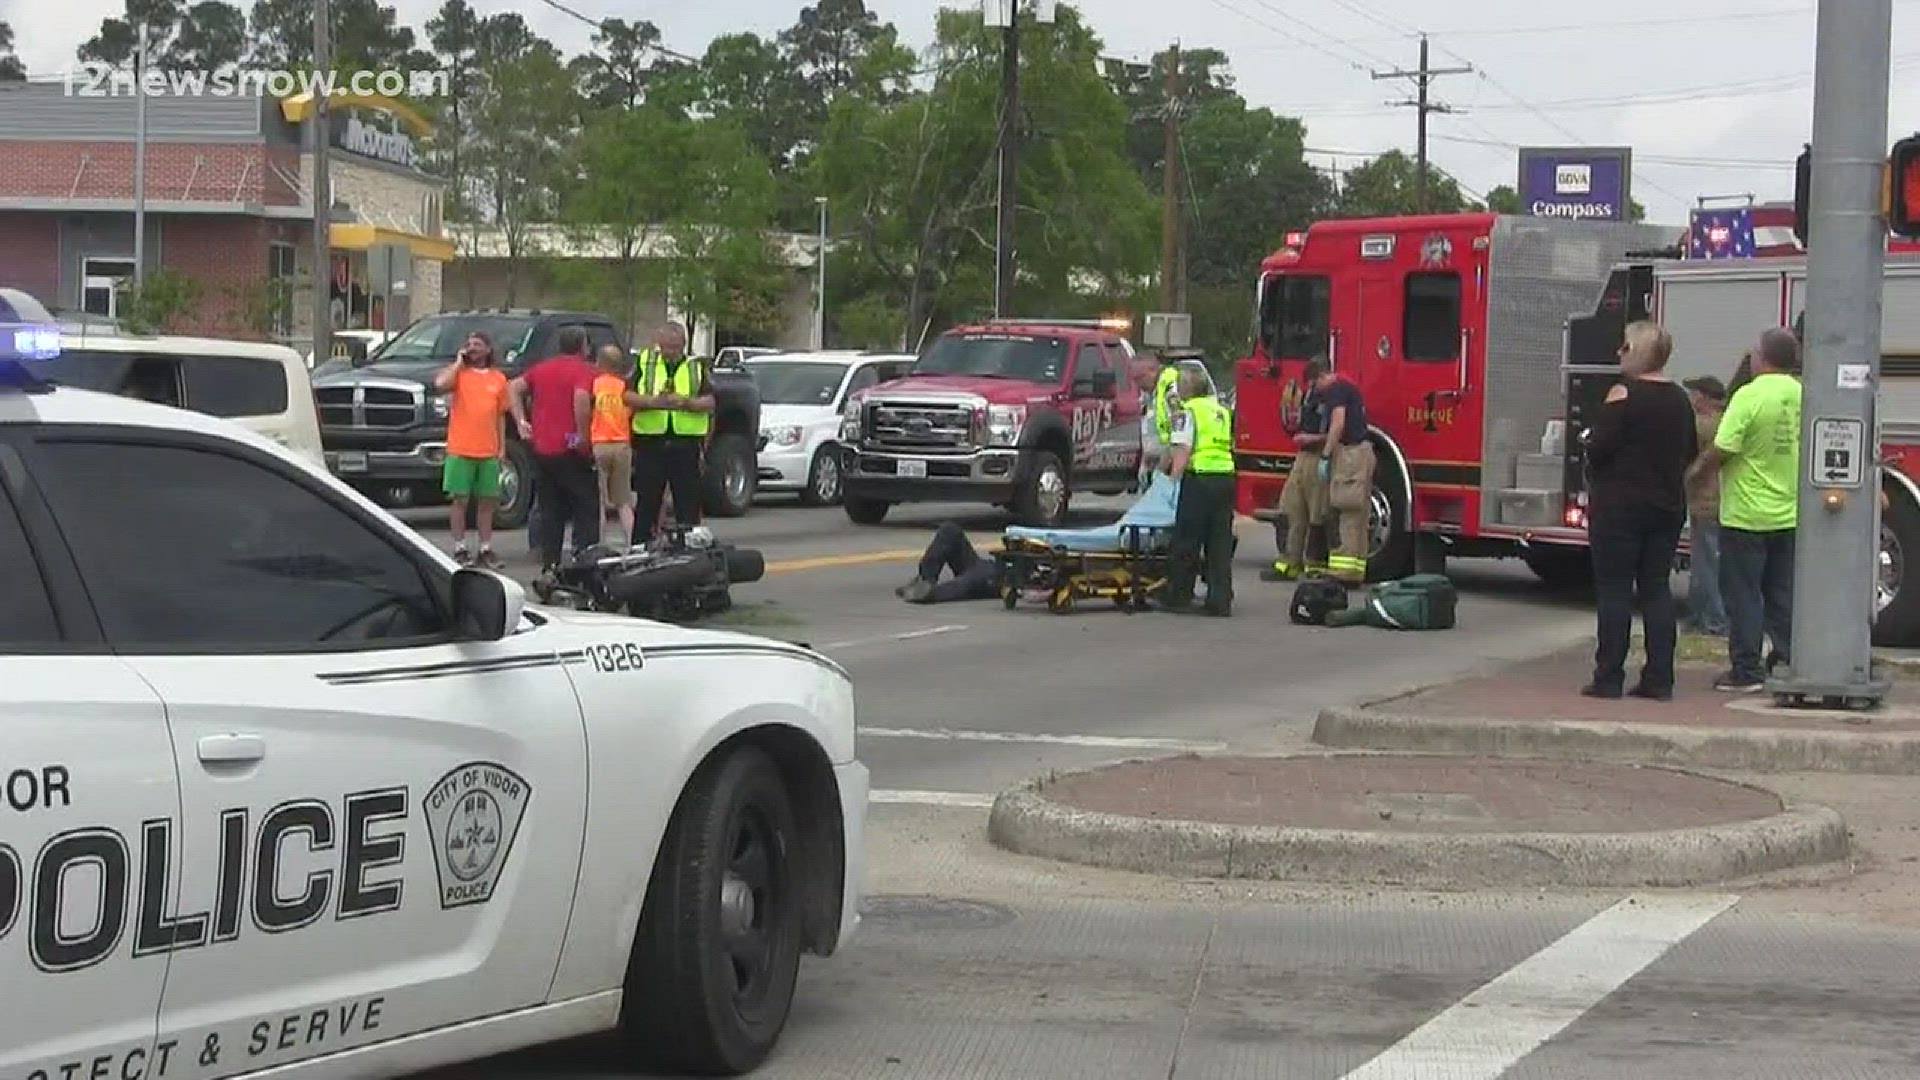 The Vidor officer said the pick-up truck was traveling west bound on the I-10 service road when it ran a red light and hit a motorcyclist traveling north bound on FM 105.